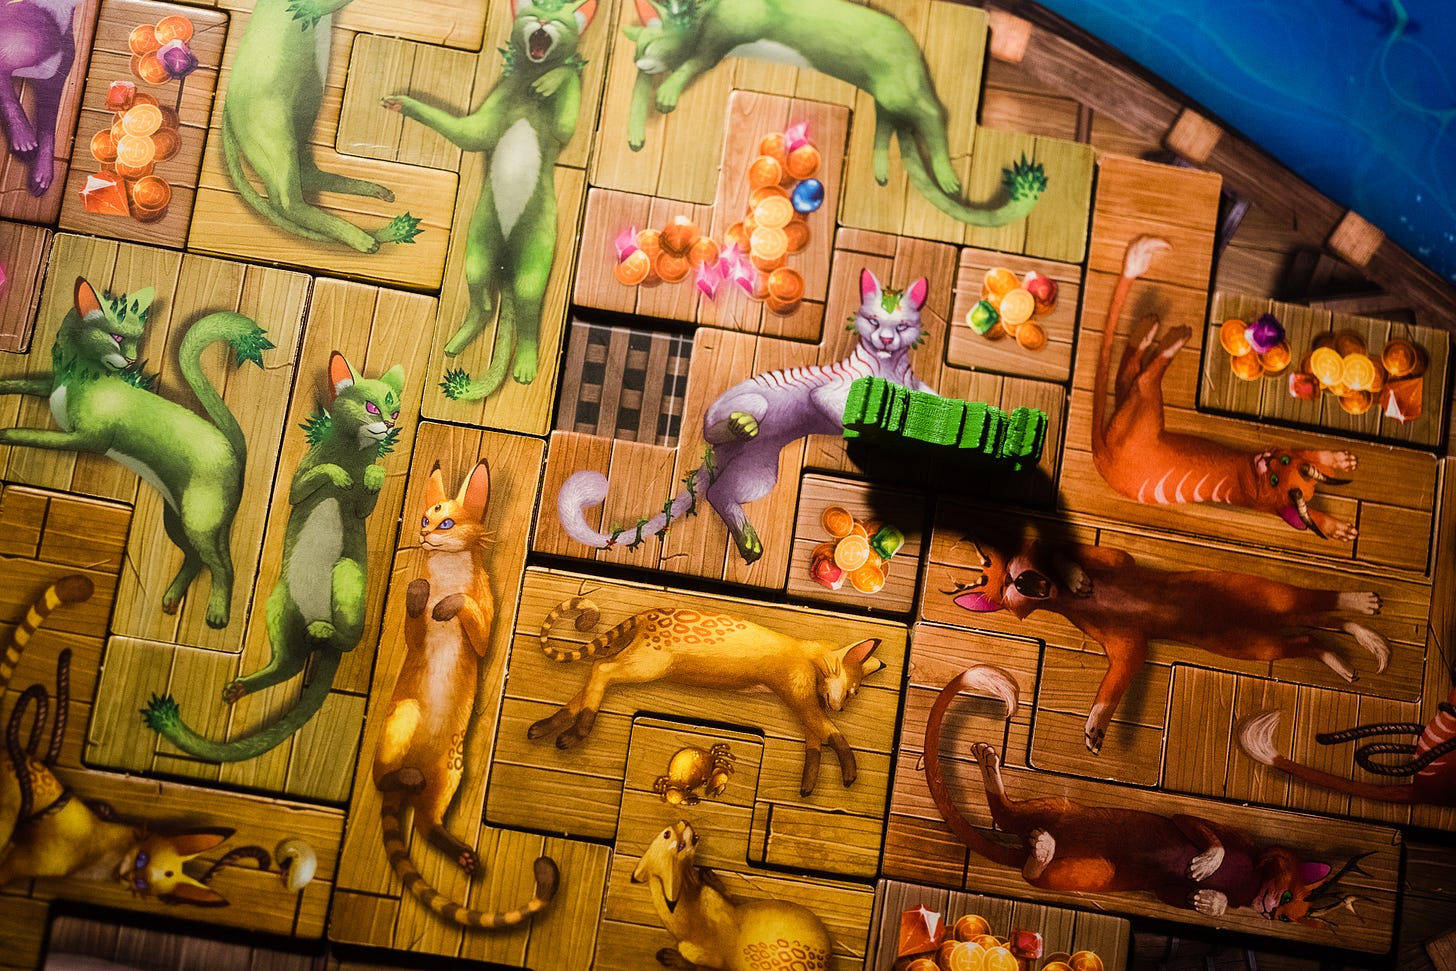 Polyomino cat tails placed on a board depicting a ship in the board game The Isle of Cats.